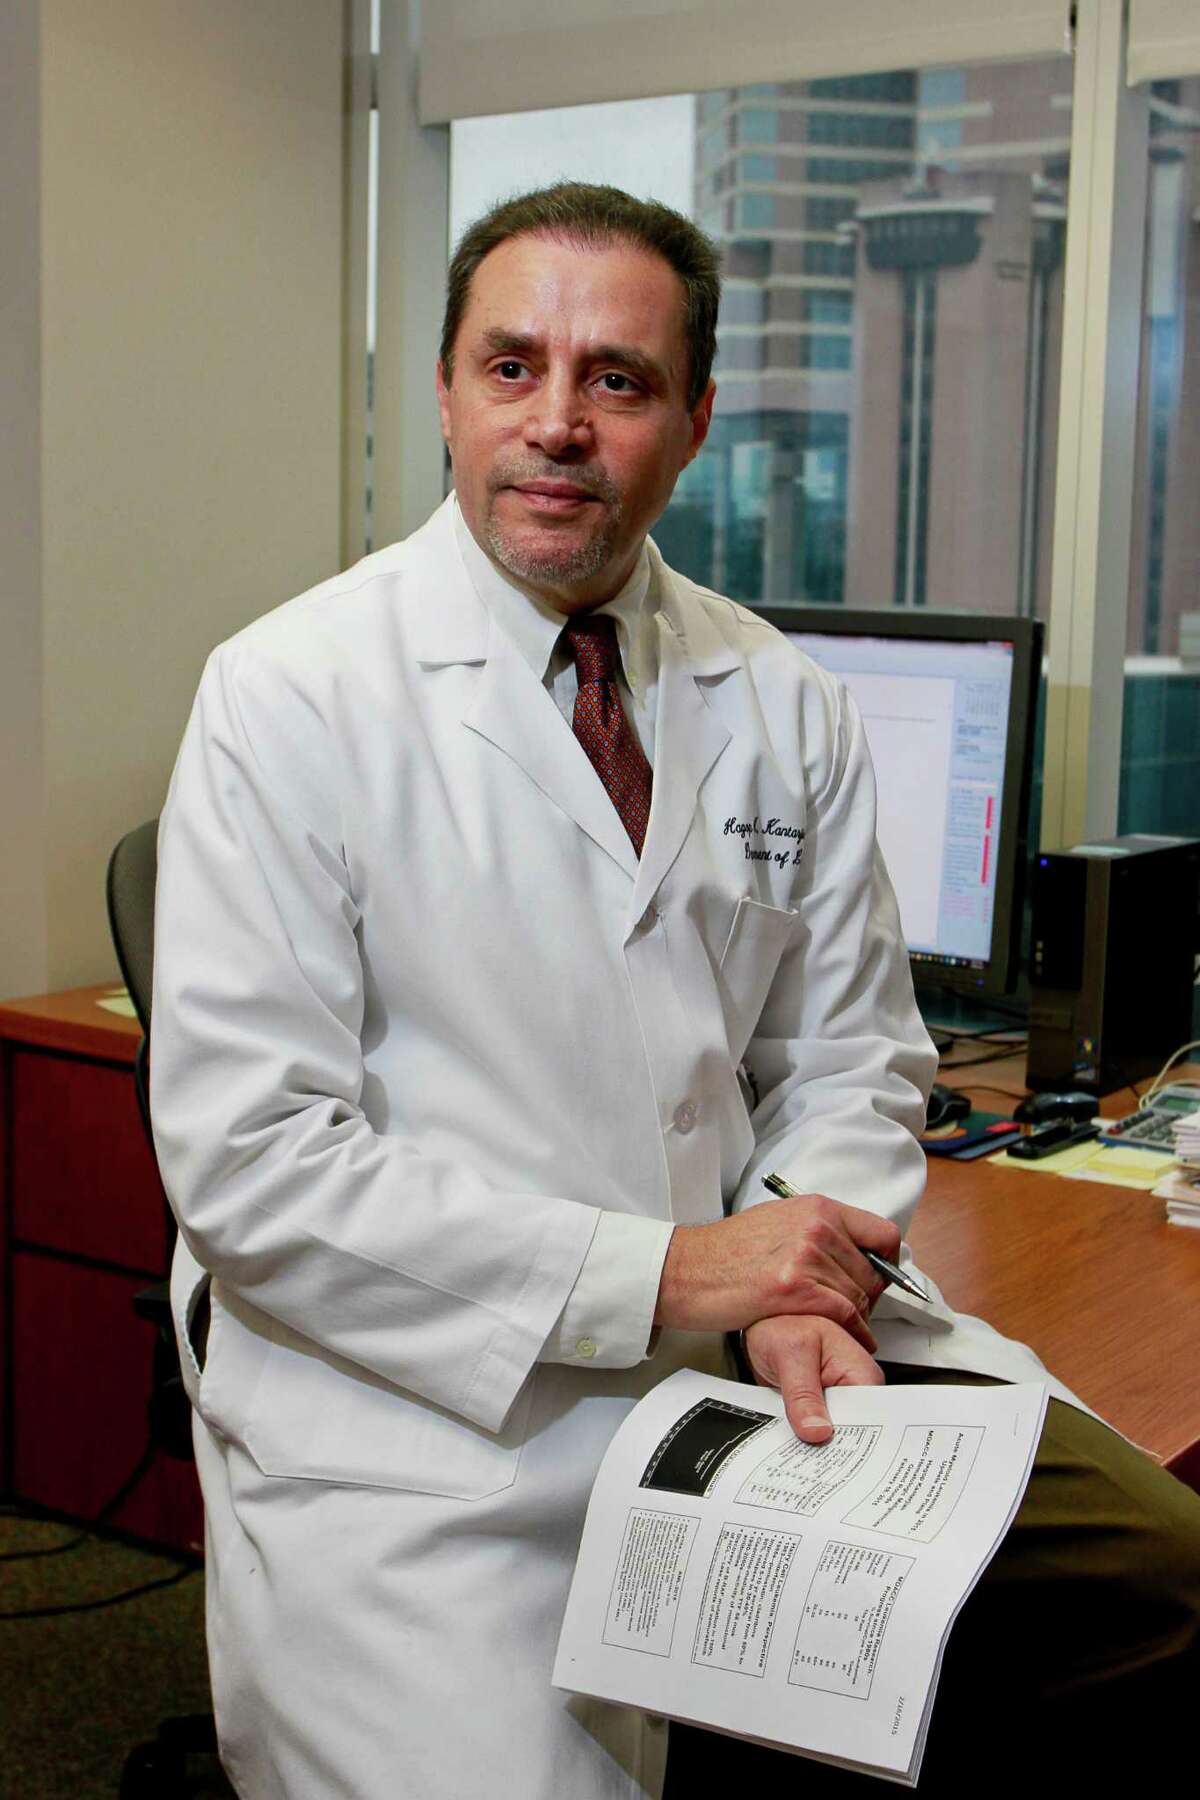 Dr. Hagop Kantarjian, chairman of MD Anderson Cancer Center's leukemia department, is planning a grassroots campaign on social media to collect the stories and signatures of 1 million cancer patients and survivors affected by exorbitant drug prices. (For the Chronicle/Gary Fountain, February 16, 2015)